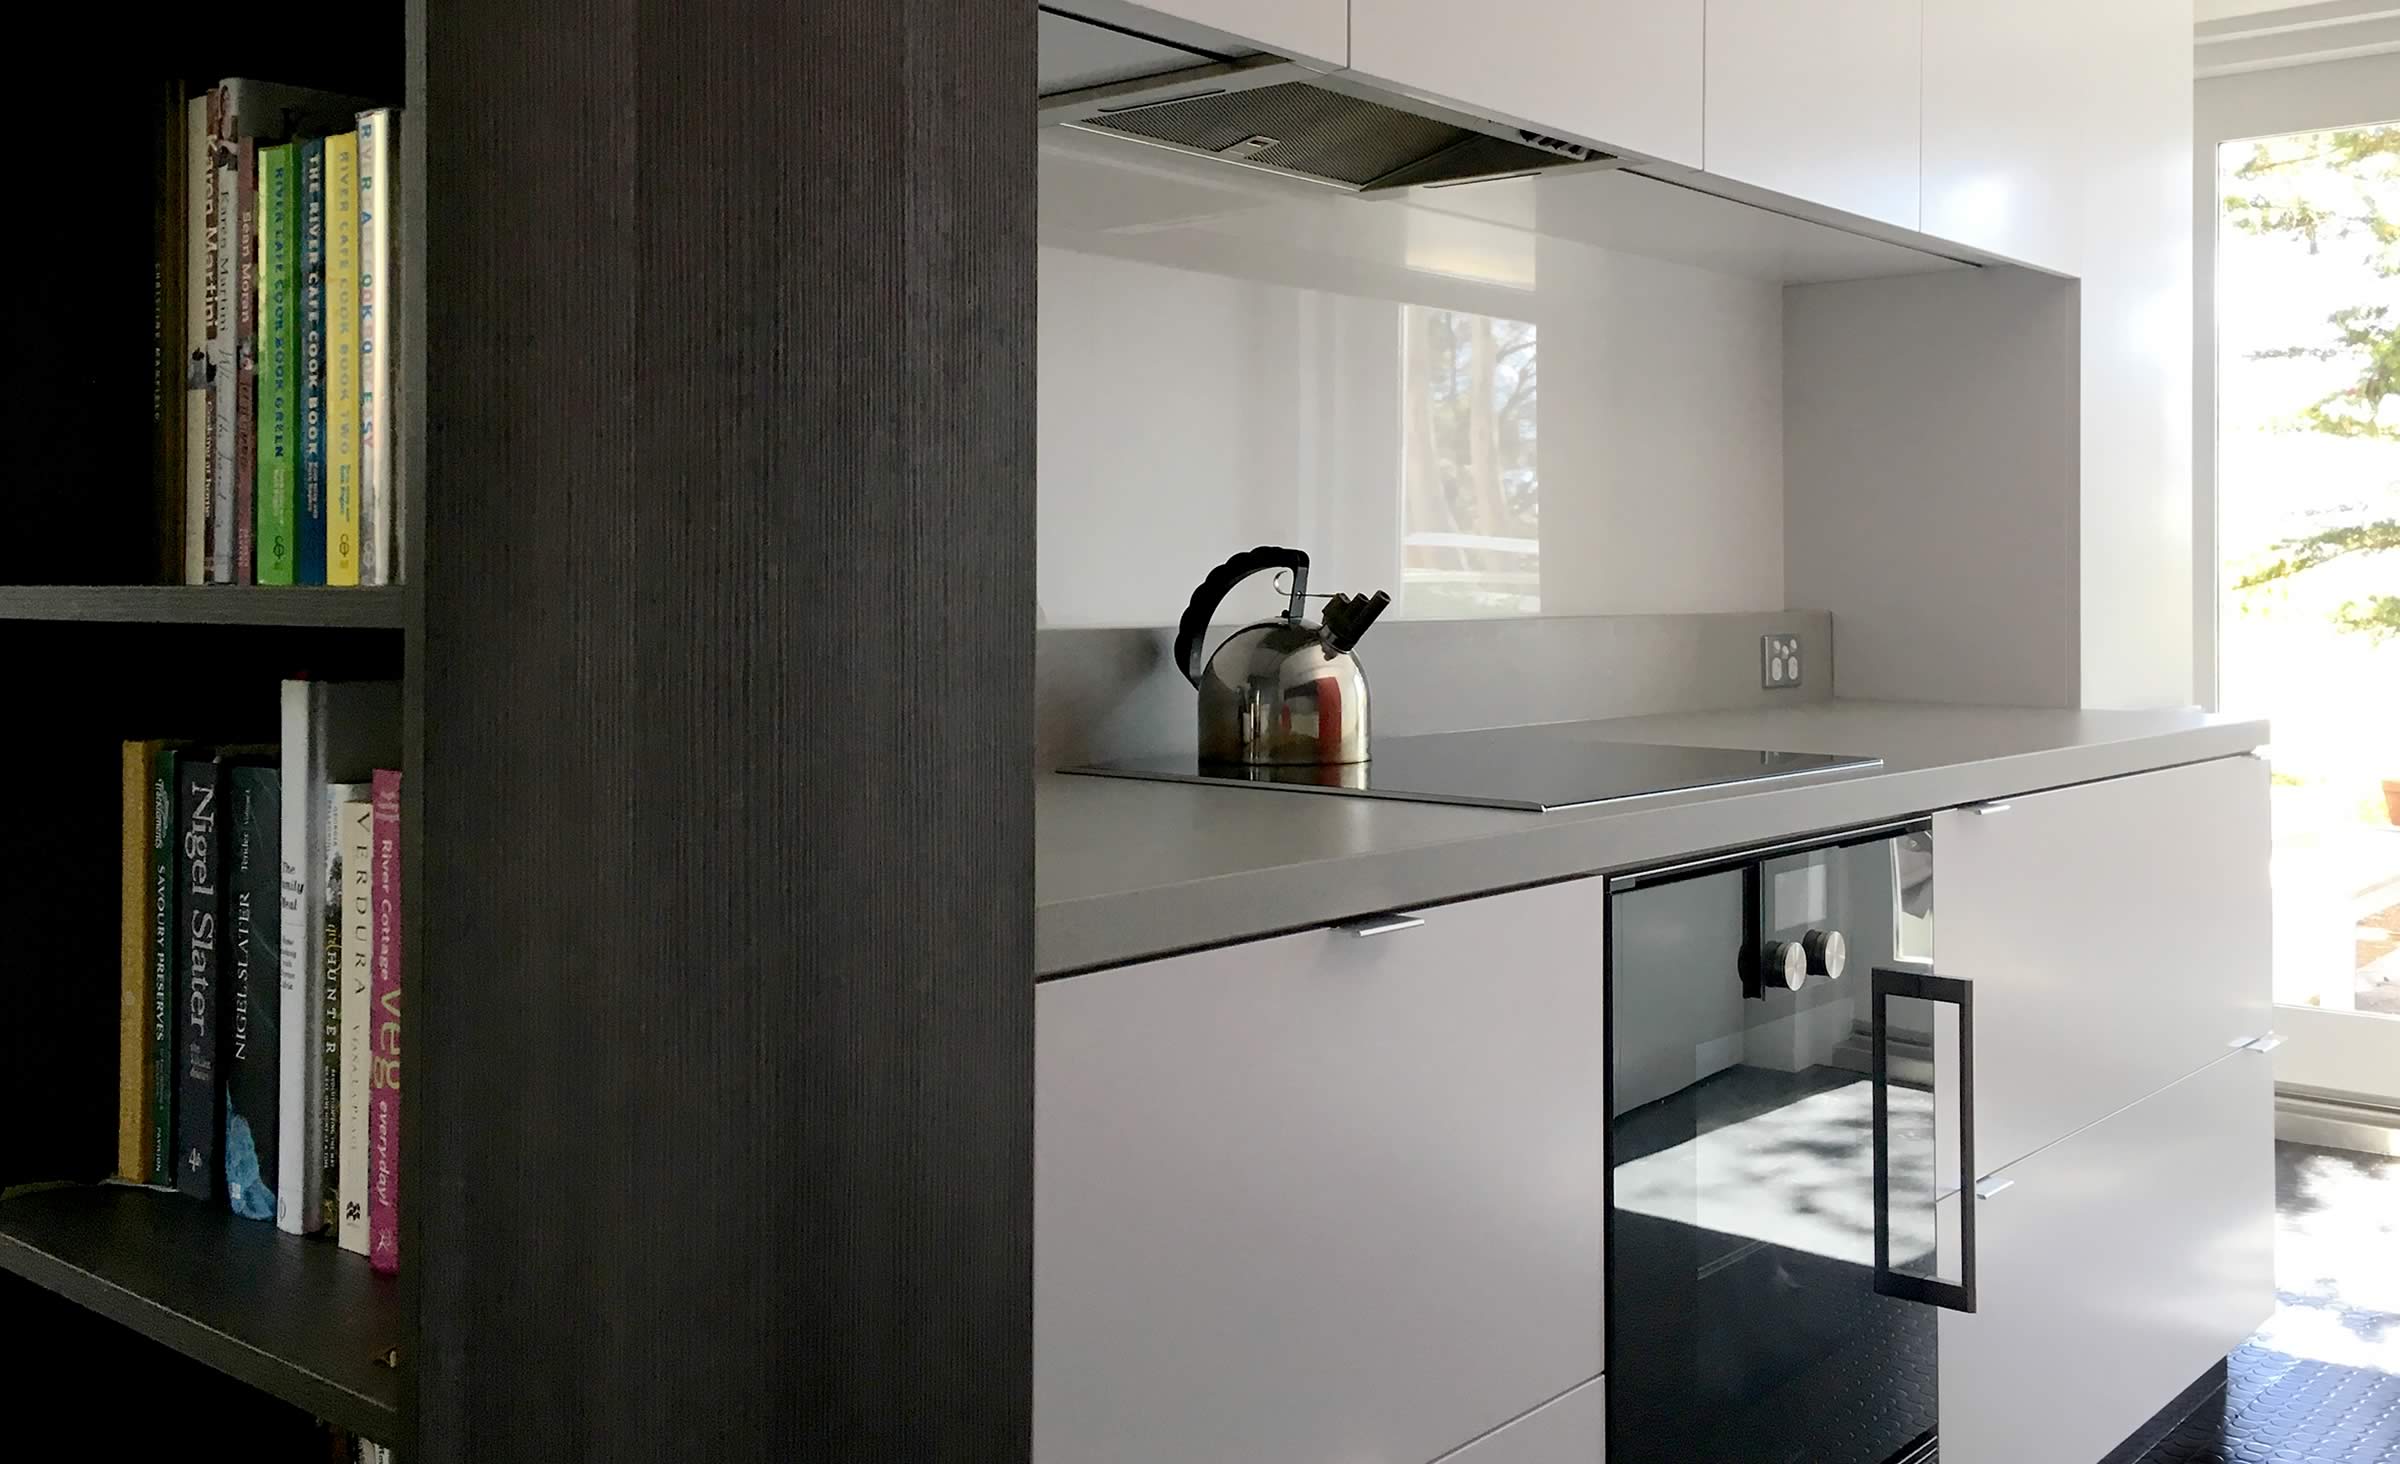 Customised kitchen joinery incorporating bookcase, stone tops, flush installed oven, and soft close cupboards.